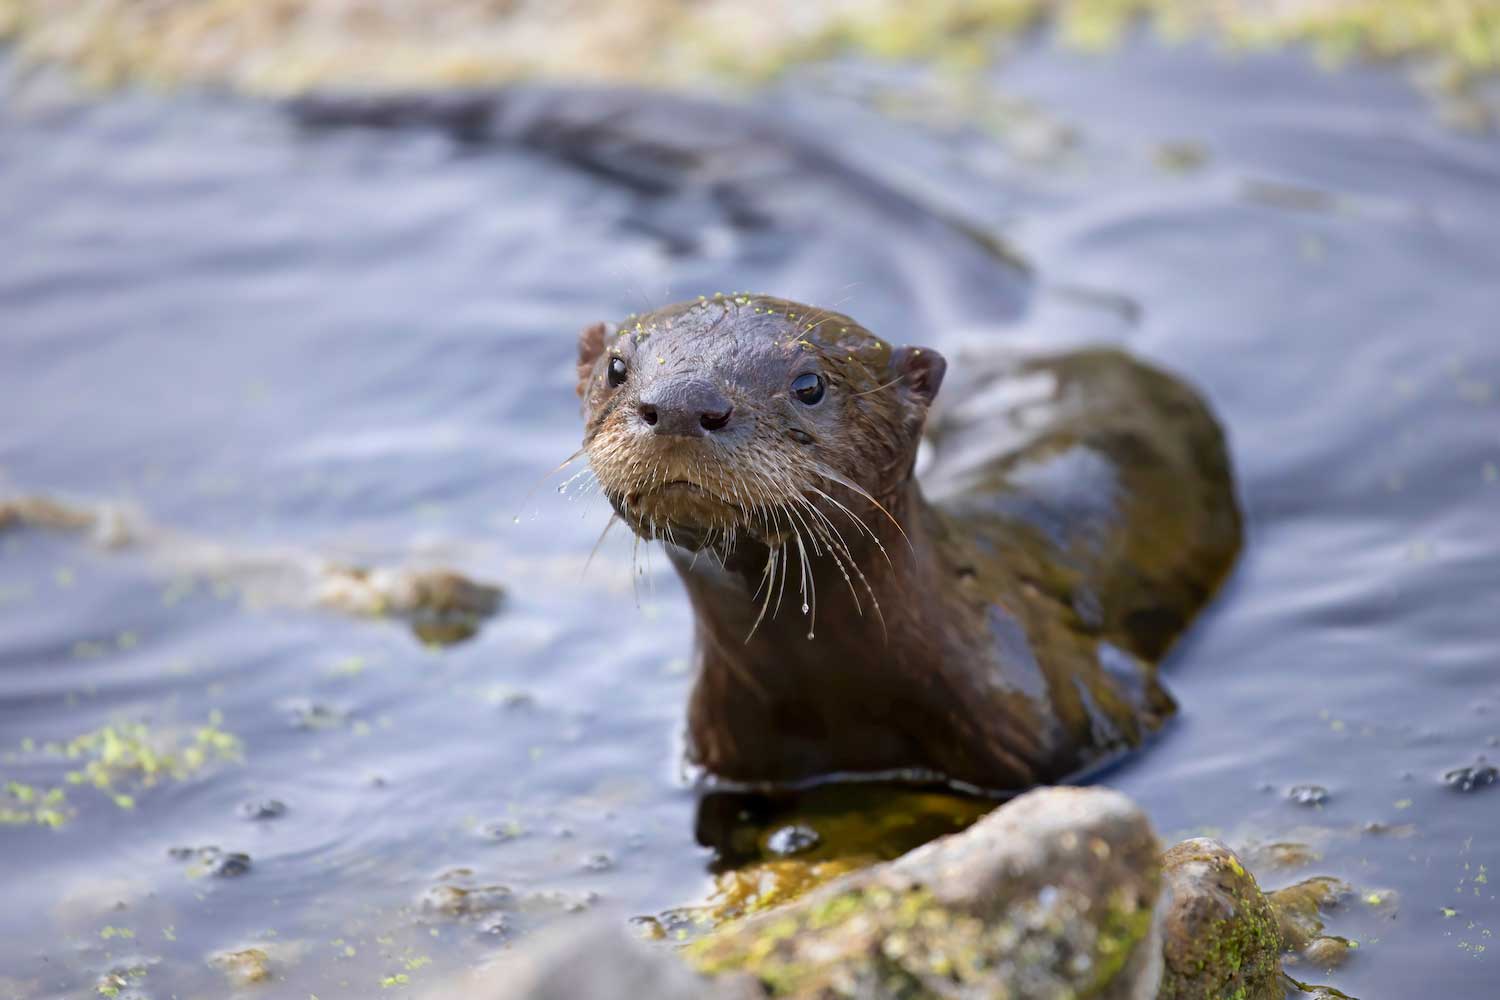 A river otter in shallow water at the water's edge.